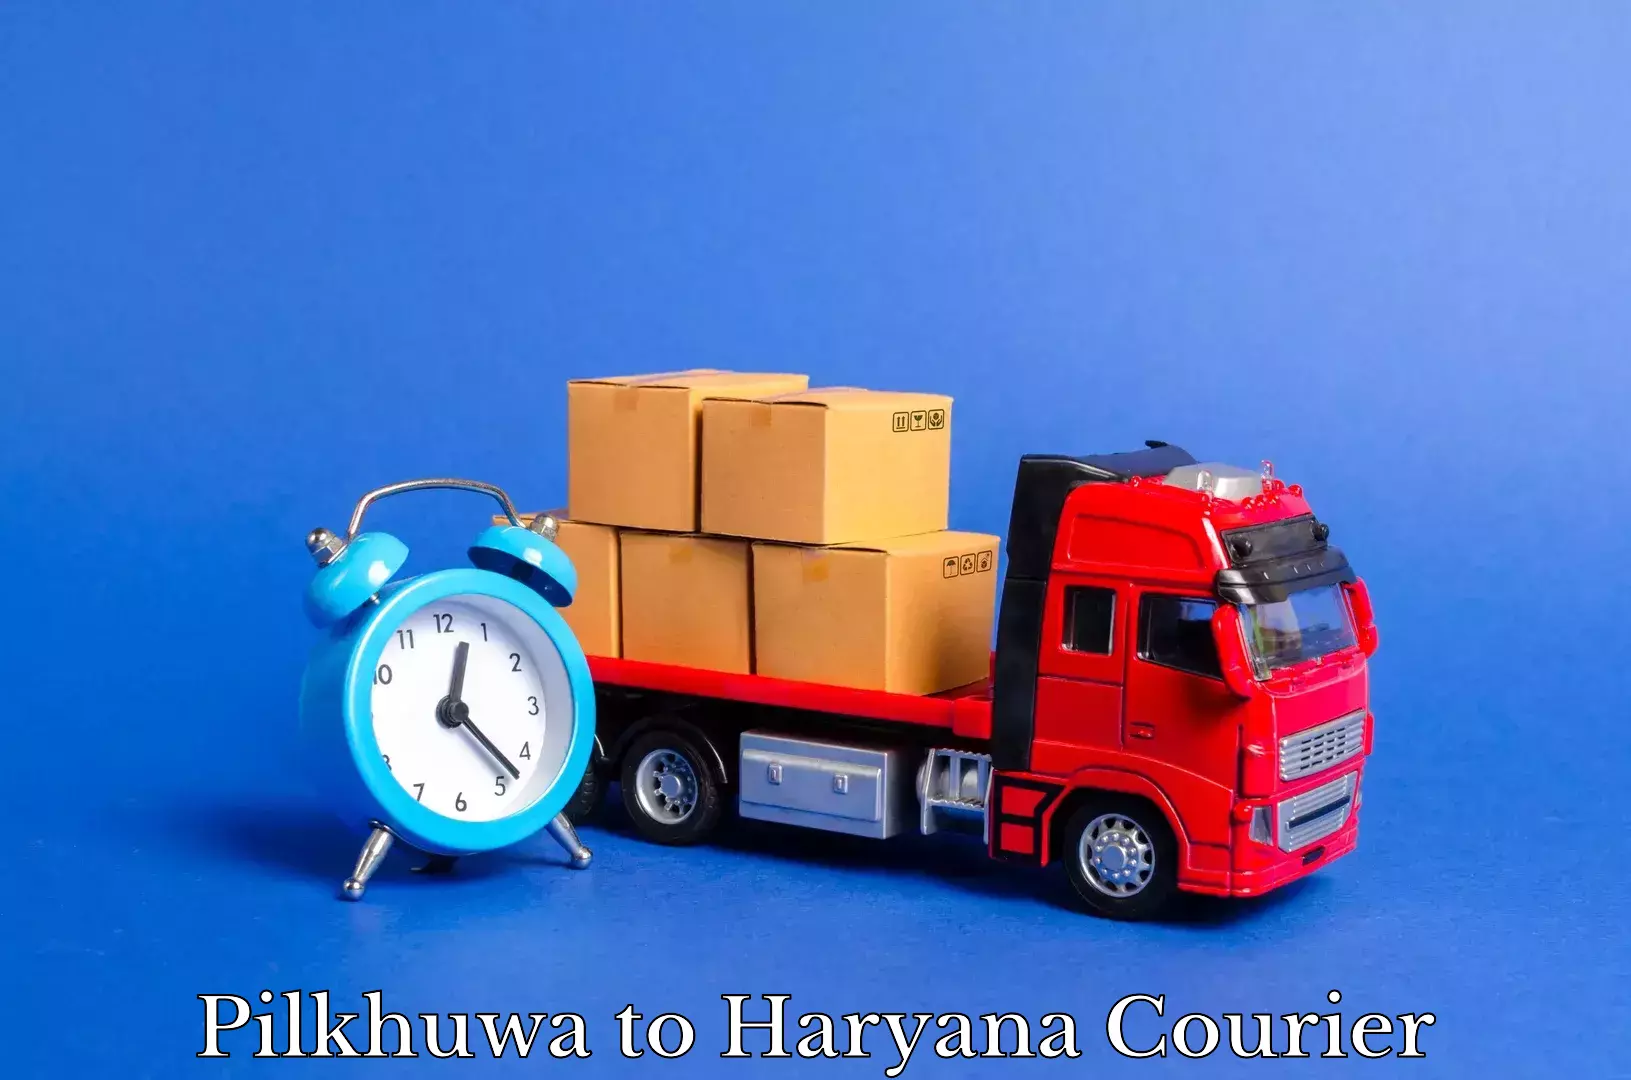 Trusted furniture movers Pilkhuwa to NCR Haryana